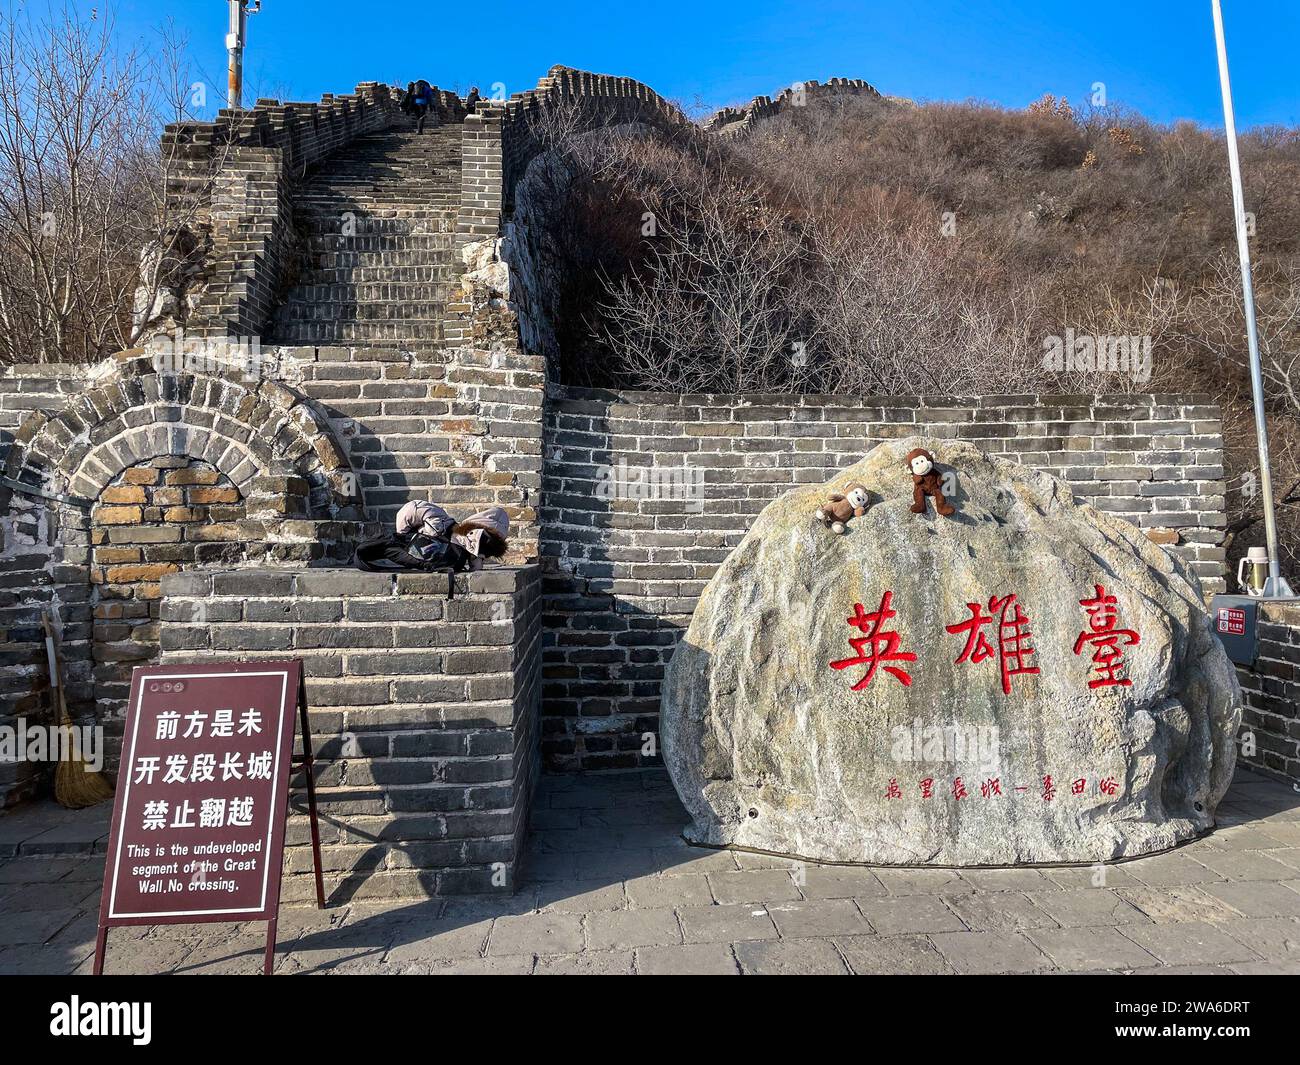 Visitors are seen walking along the Mutianyu Great Wall in the Huairou District of Beijing, China on Dec. 9, 2023. Tee Mutianyu Great Wall was built in 1368 AD during the Northern Qi Dynasty. The Mutianyu links to the Gubeikou in the east and Juyongguan in the west. and has several famous watchtowers including the Zhengguantai, Dajiaolou, Yingfeidaoyang, Jiankou and Beijingjie. The visitors area of the Mutianyu section is approximately 5,000 meters (3.1 miles) long and is located approximately 75 kilometers from the center of Beijing. (Photo by Samuel Rigelhaupt/Sipa USA) Stock Photo